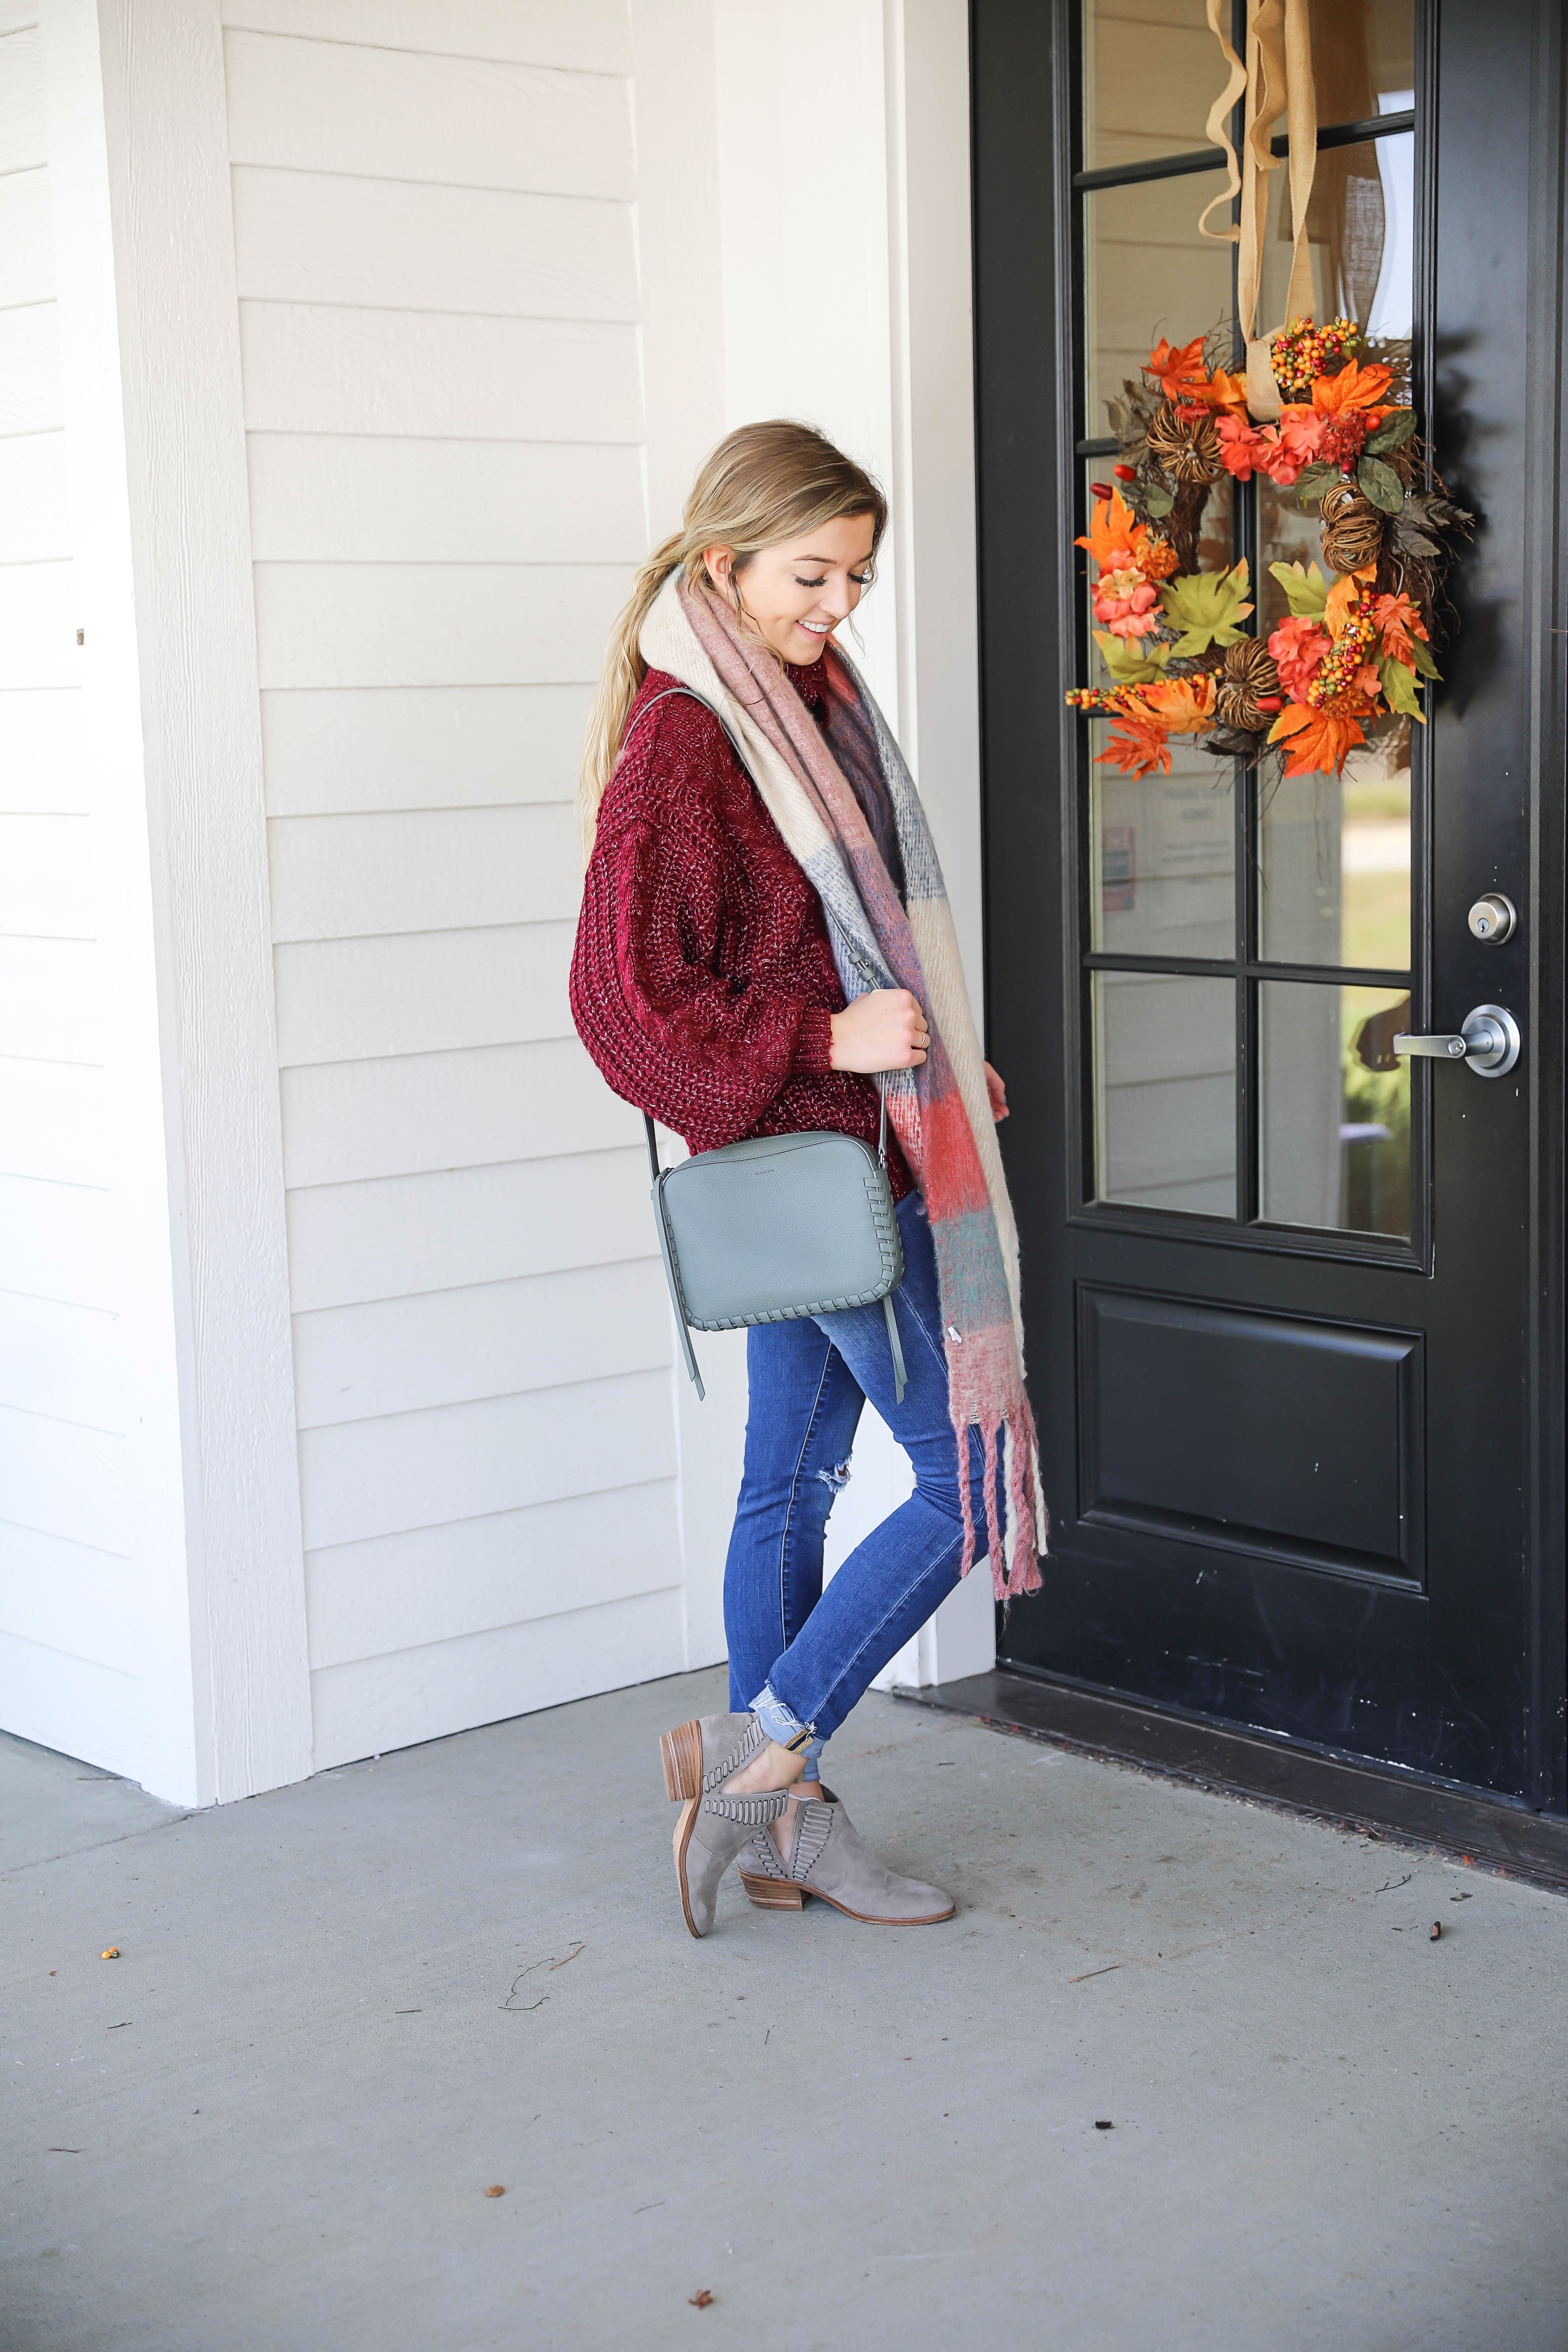 Burgundy knit sweater with the softest plaid oversized scarf! Paired with ripped denim jeans and my vince camuto booties! This is the perfect fall outfit you need in your closet! A few pieces are from Red Dress Boutique which is the best online store, especially for fall clothes! Details on fashion blog daily dose of charm by lauren lindmark